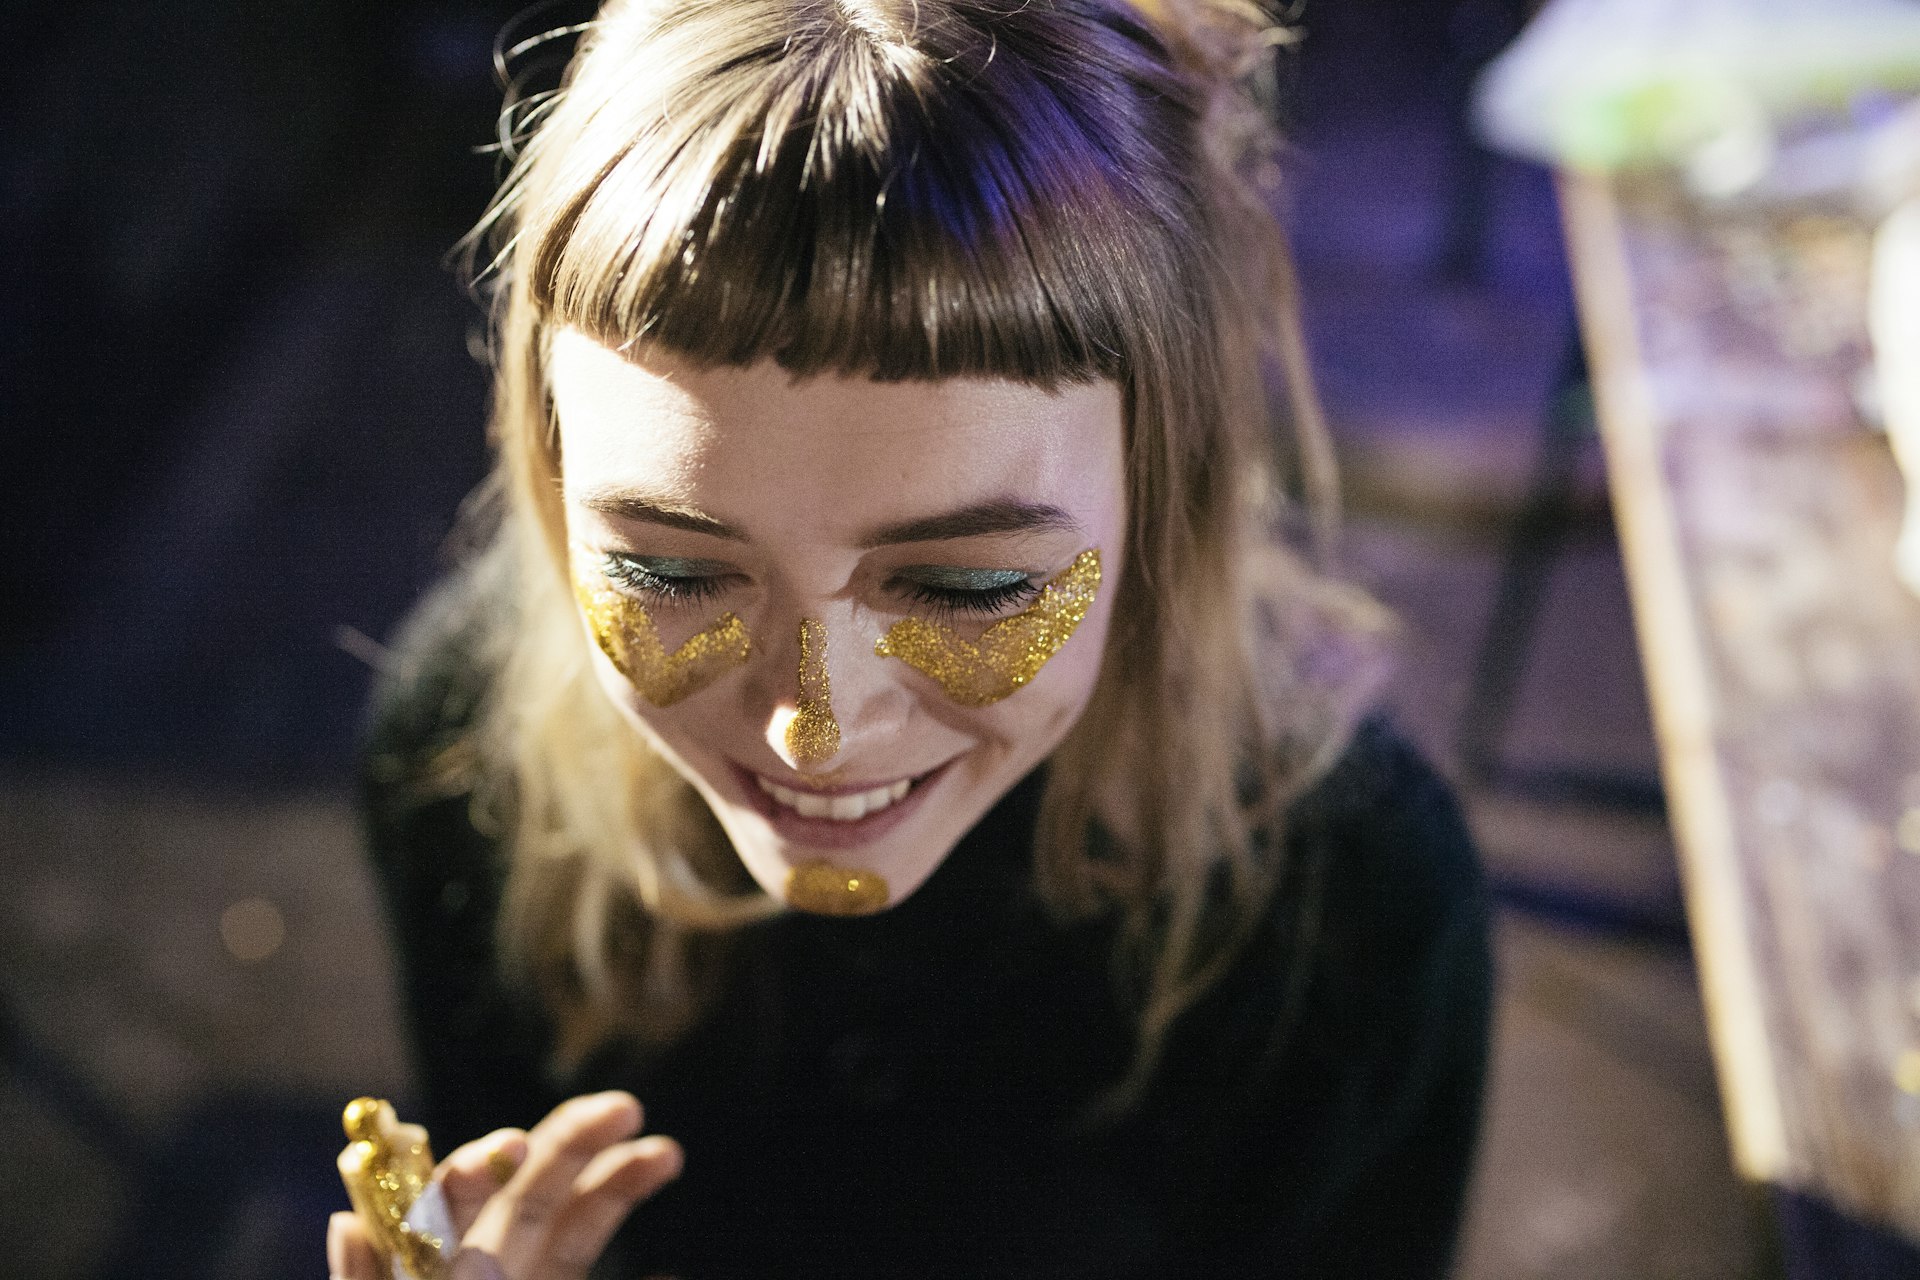 A woman smiles as she paints her face with gold glitter while out clubbing